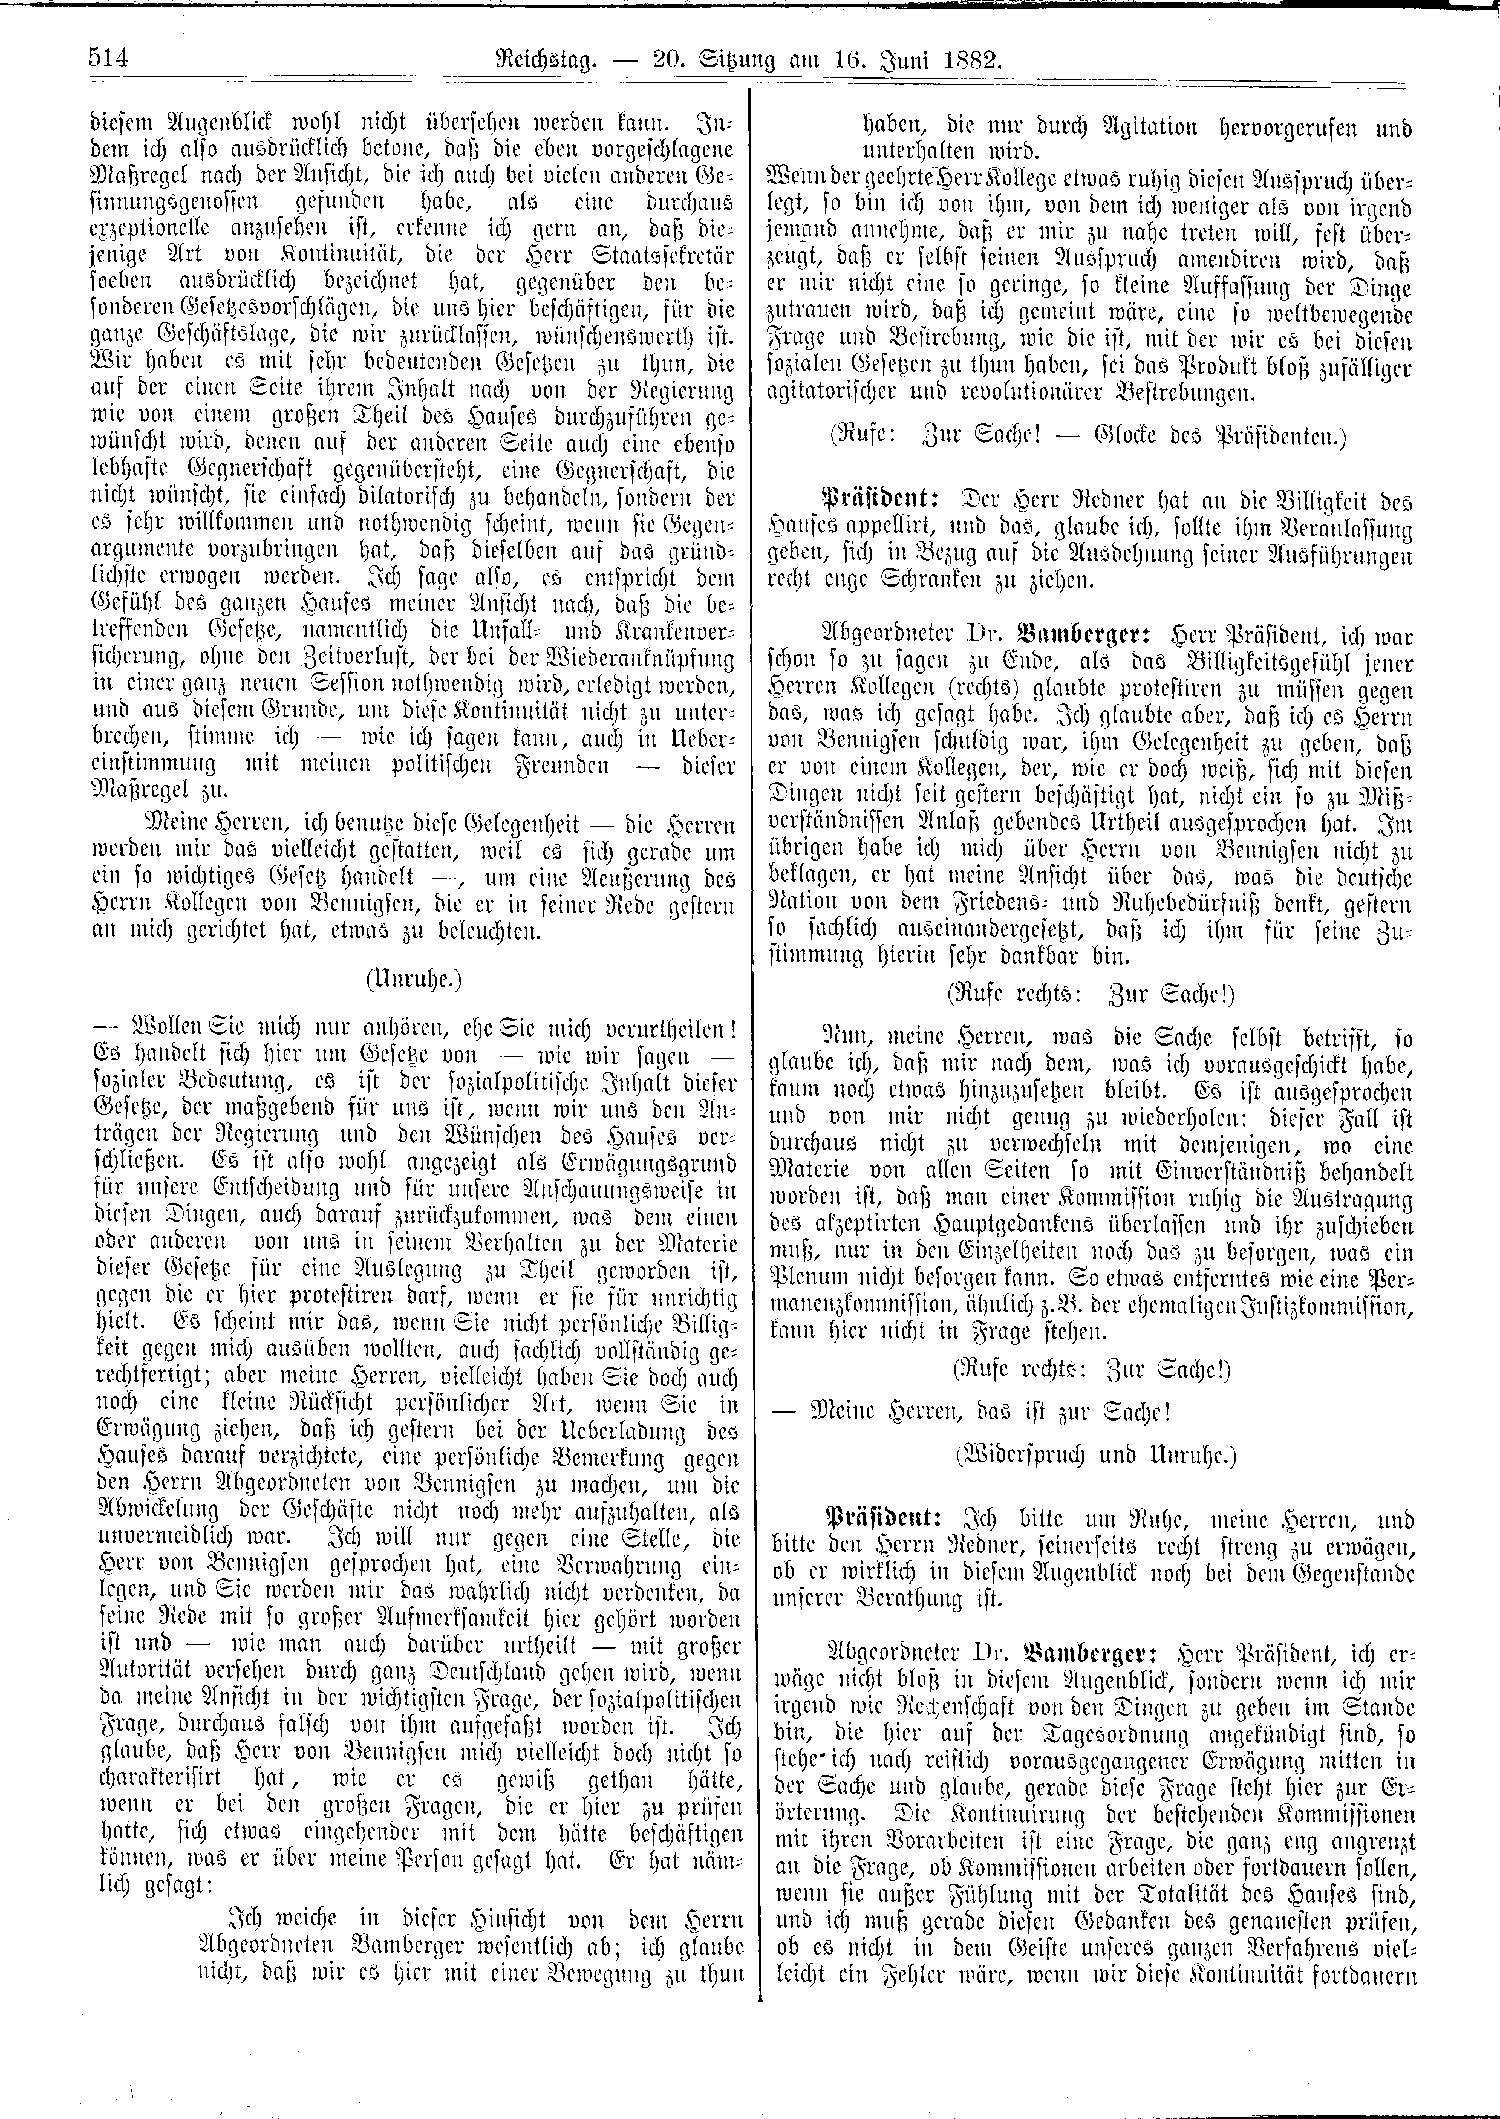 Scan of page 514